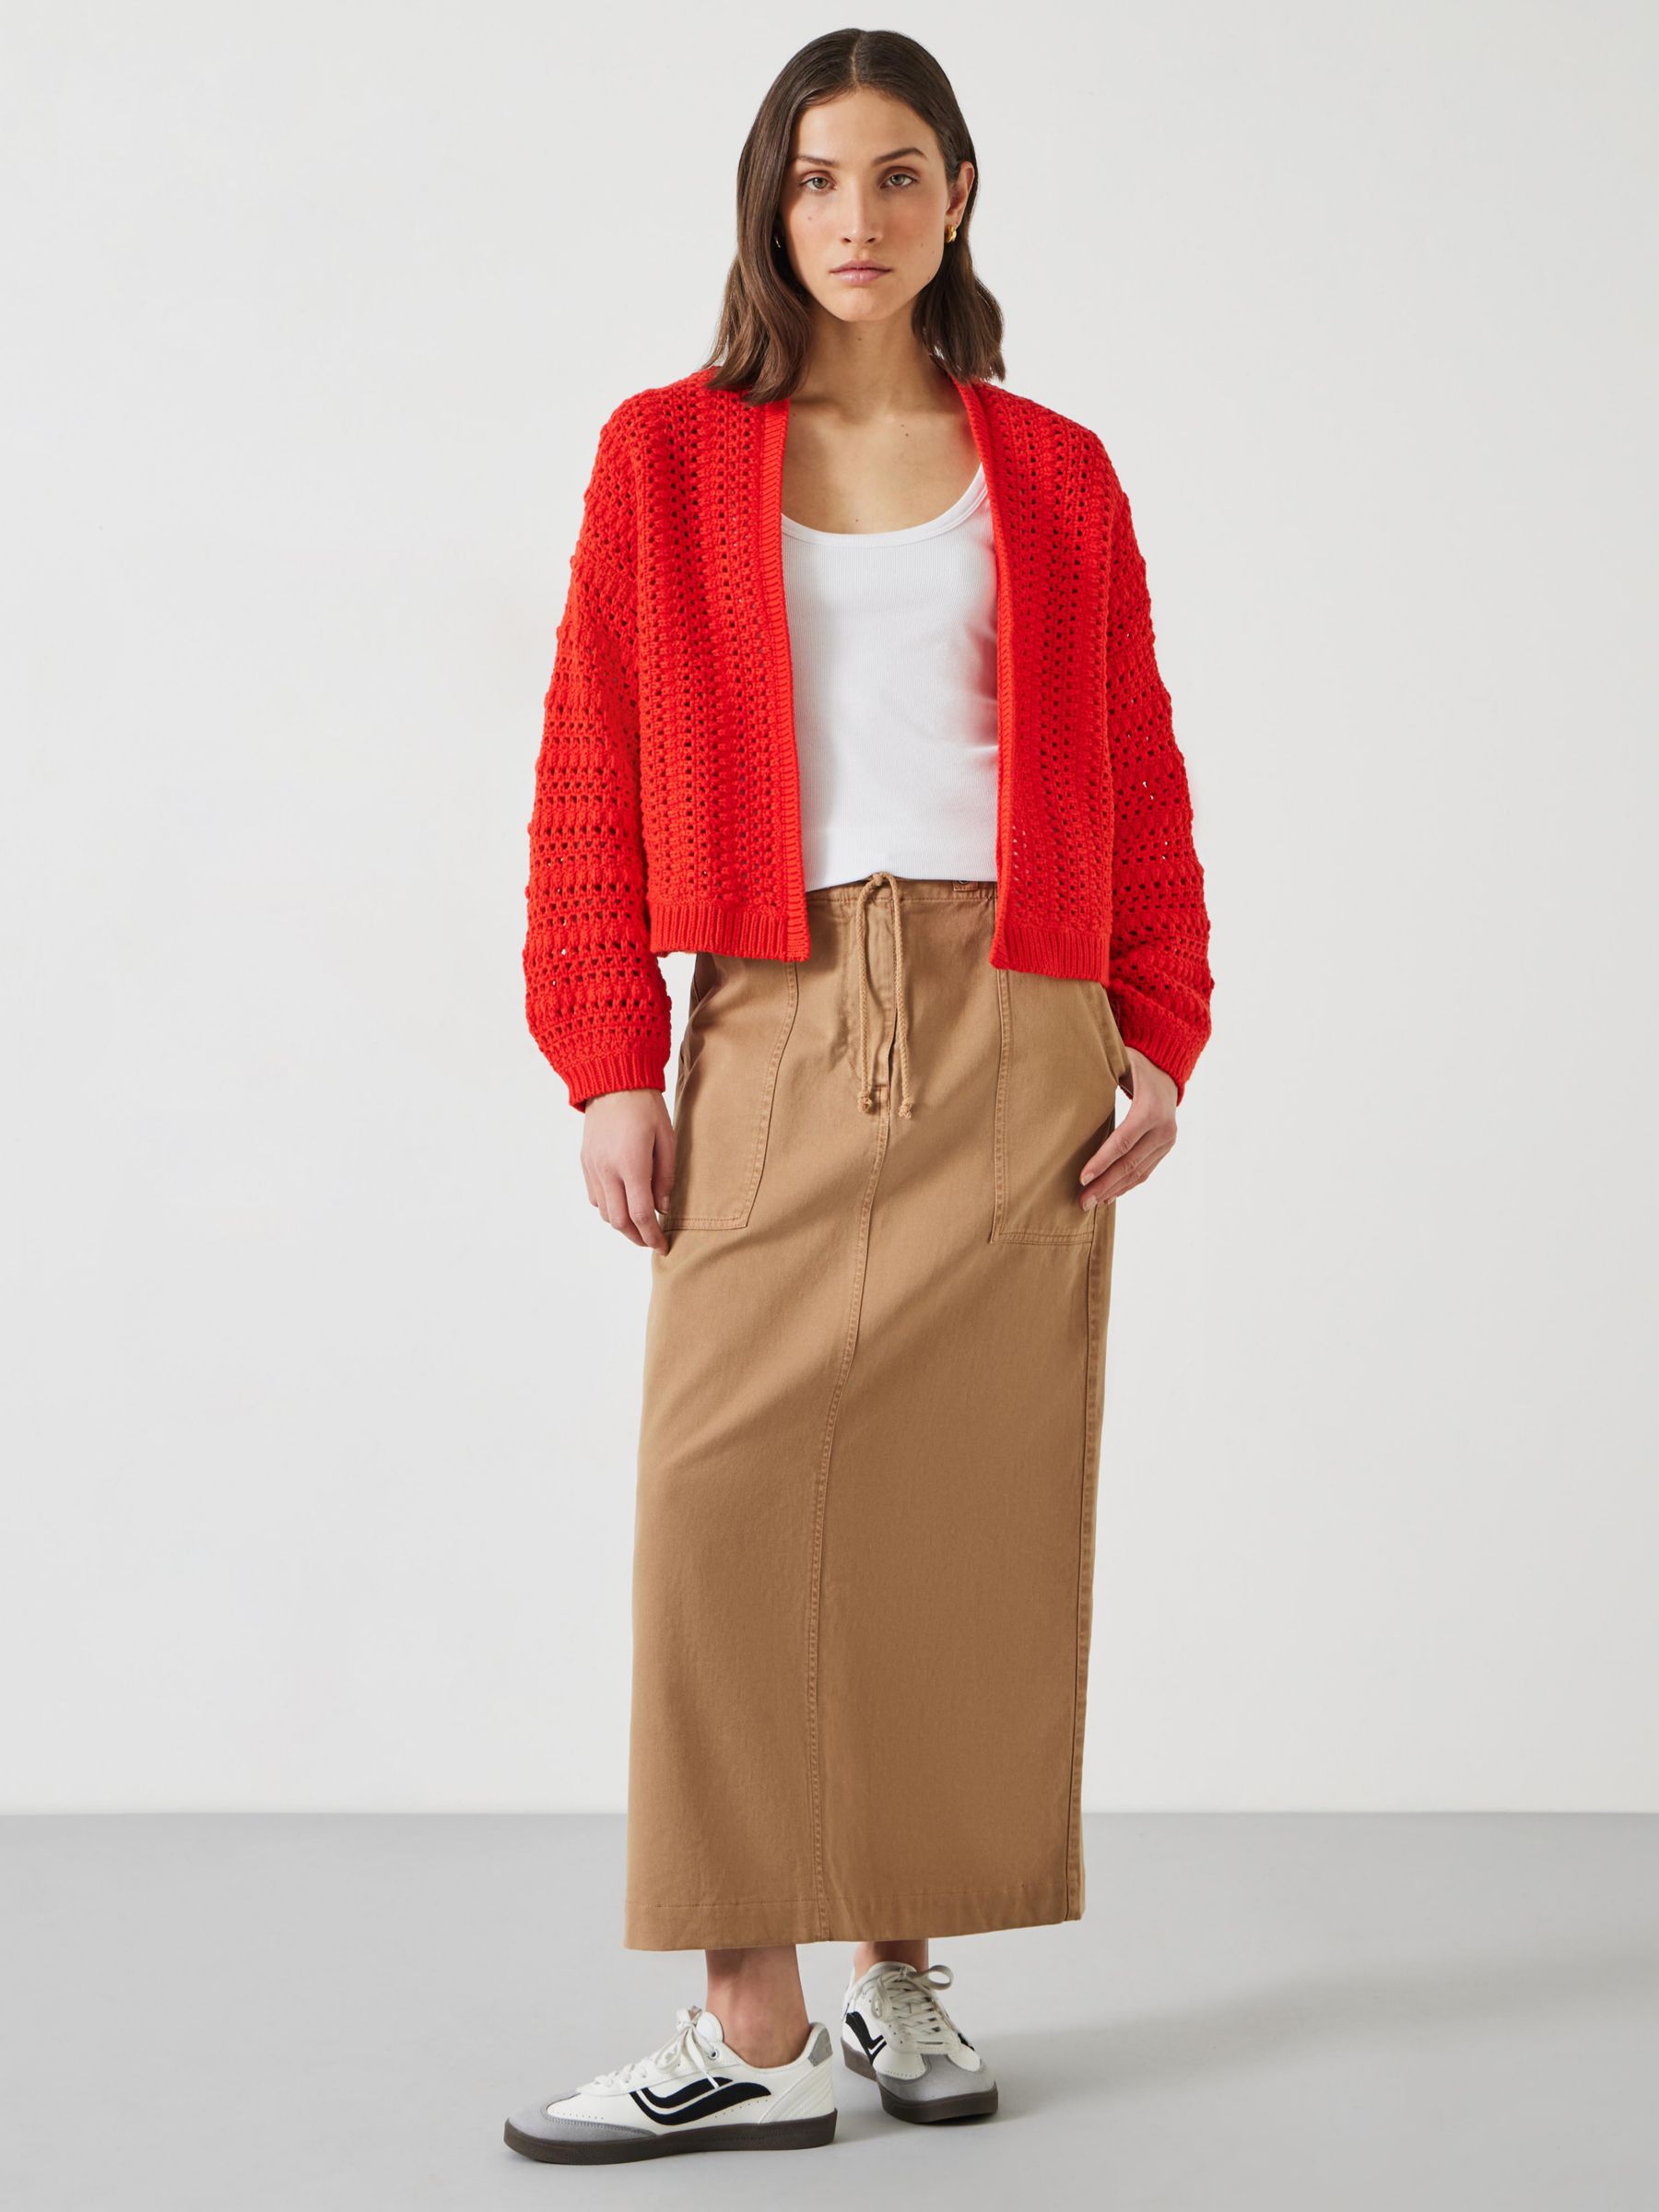 HUSH Pixie Knitted Edge Cardigan, Fiery Red, L